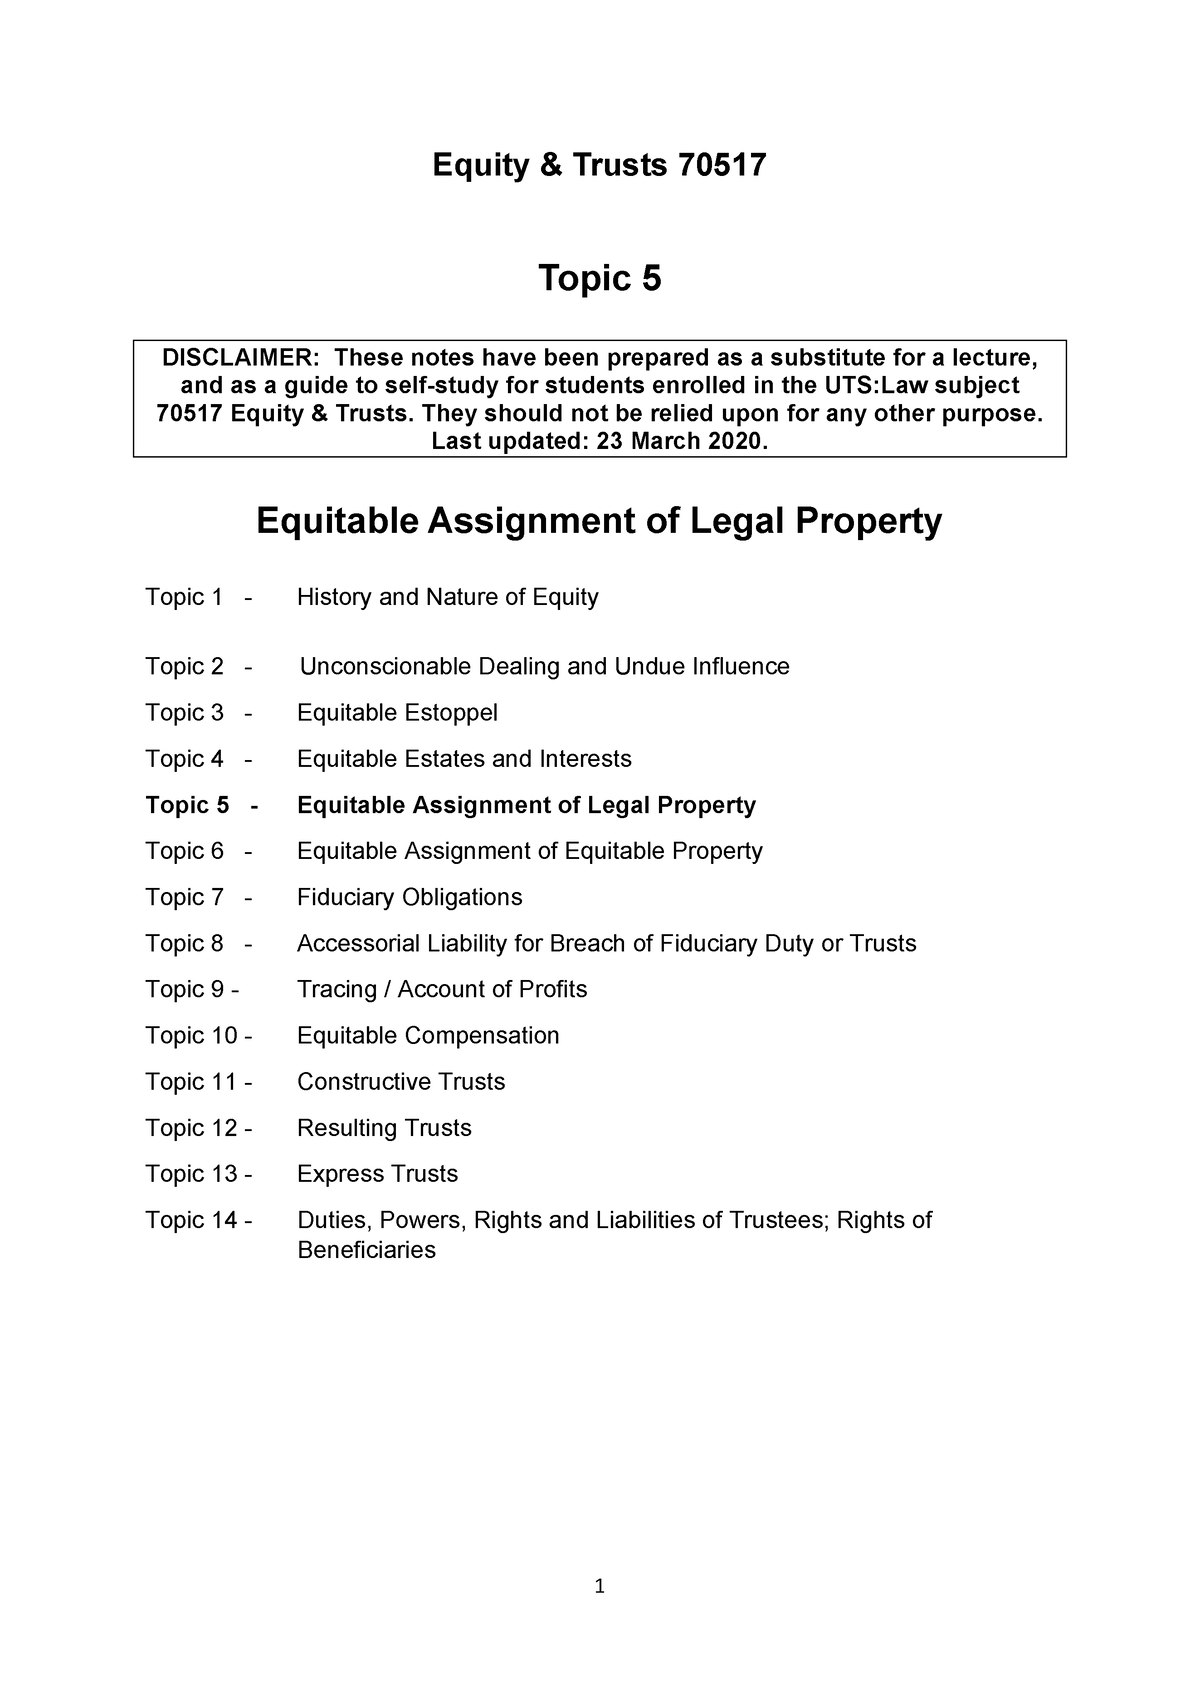 example of equitable assignment